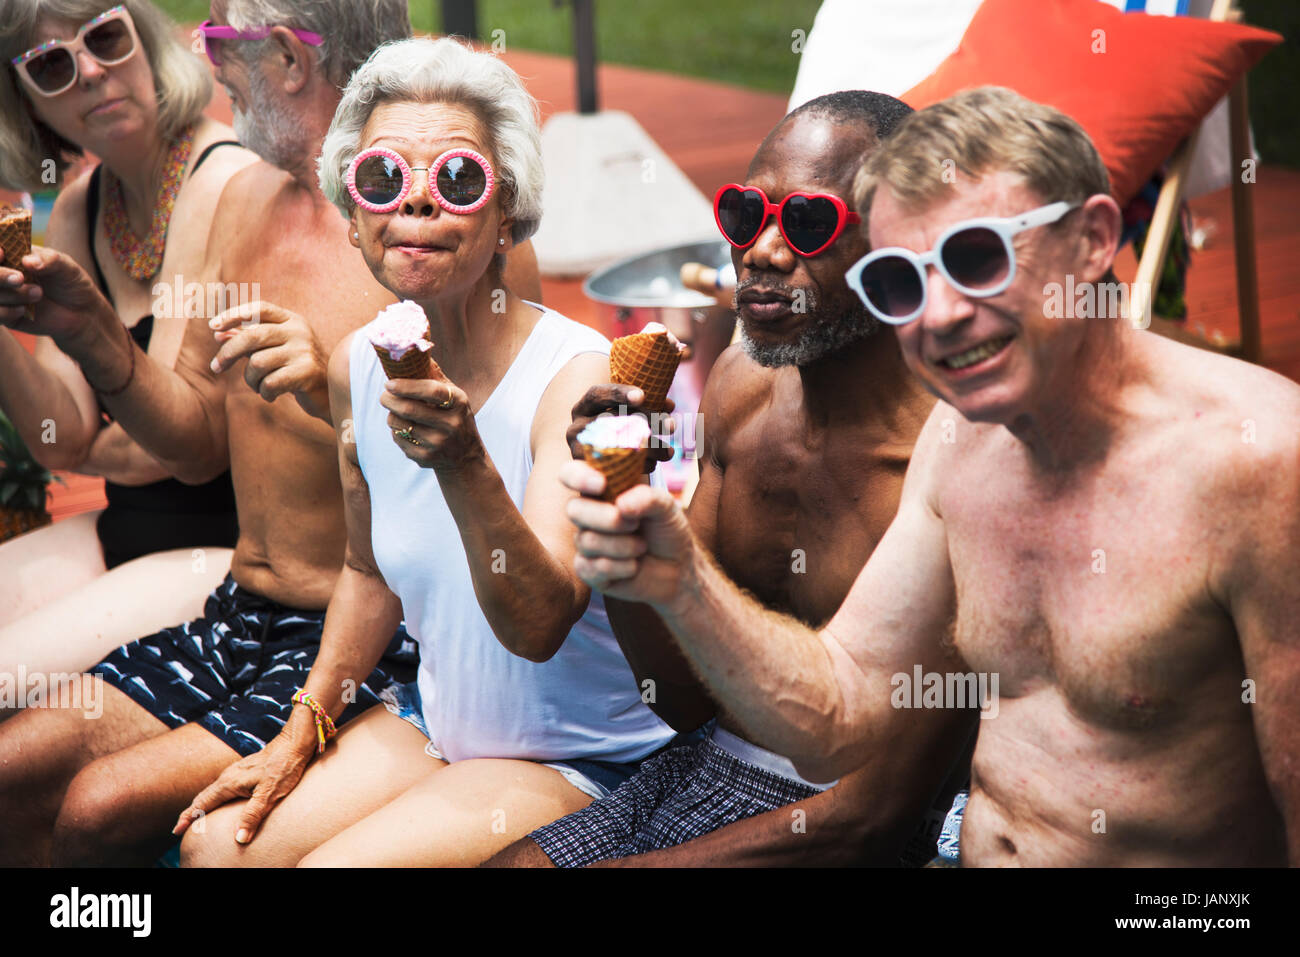 Group of diverse senior adults eating ice cream together Stock Photo